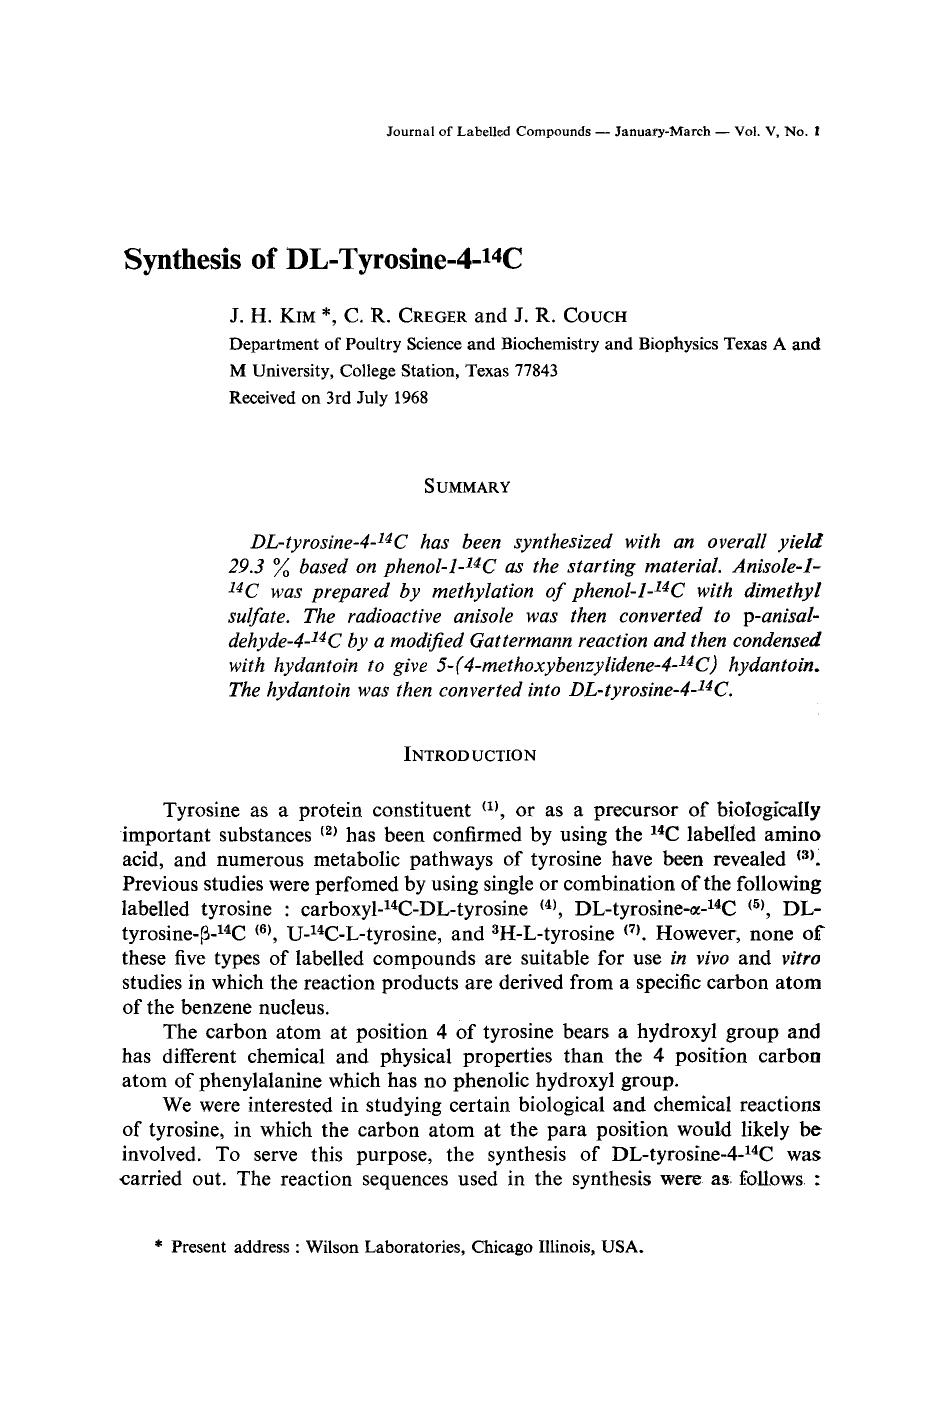 Synthesis of DL-tyrosine-4-14C by Unknown